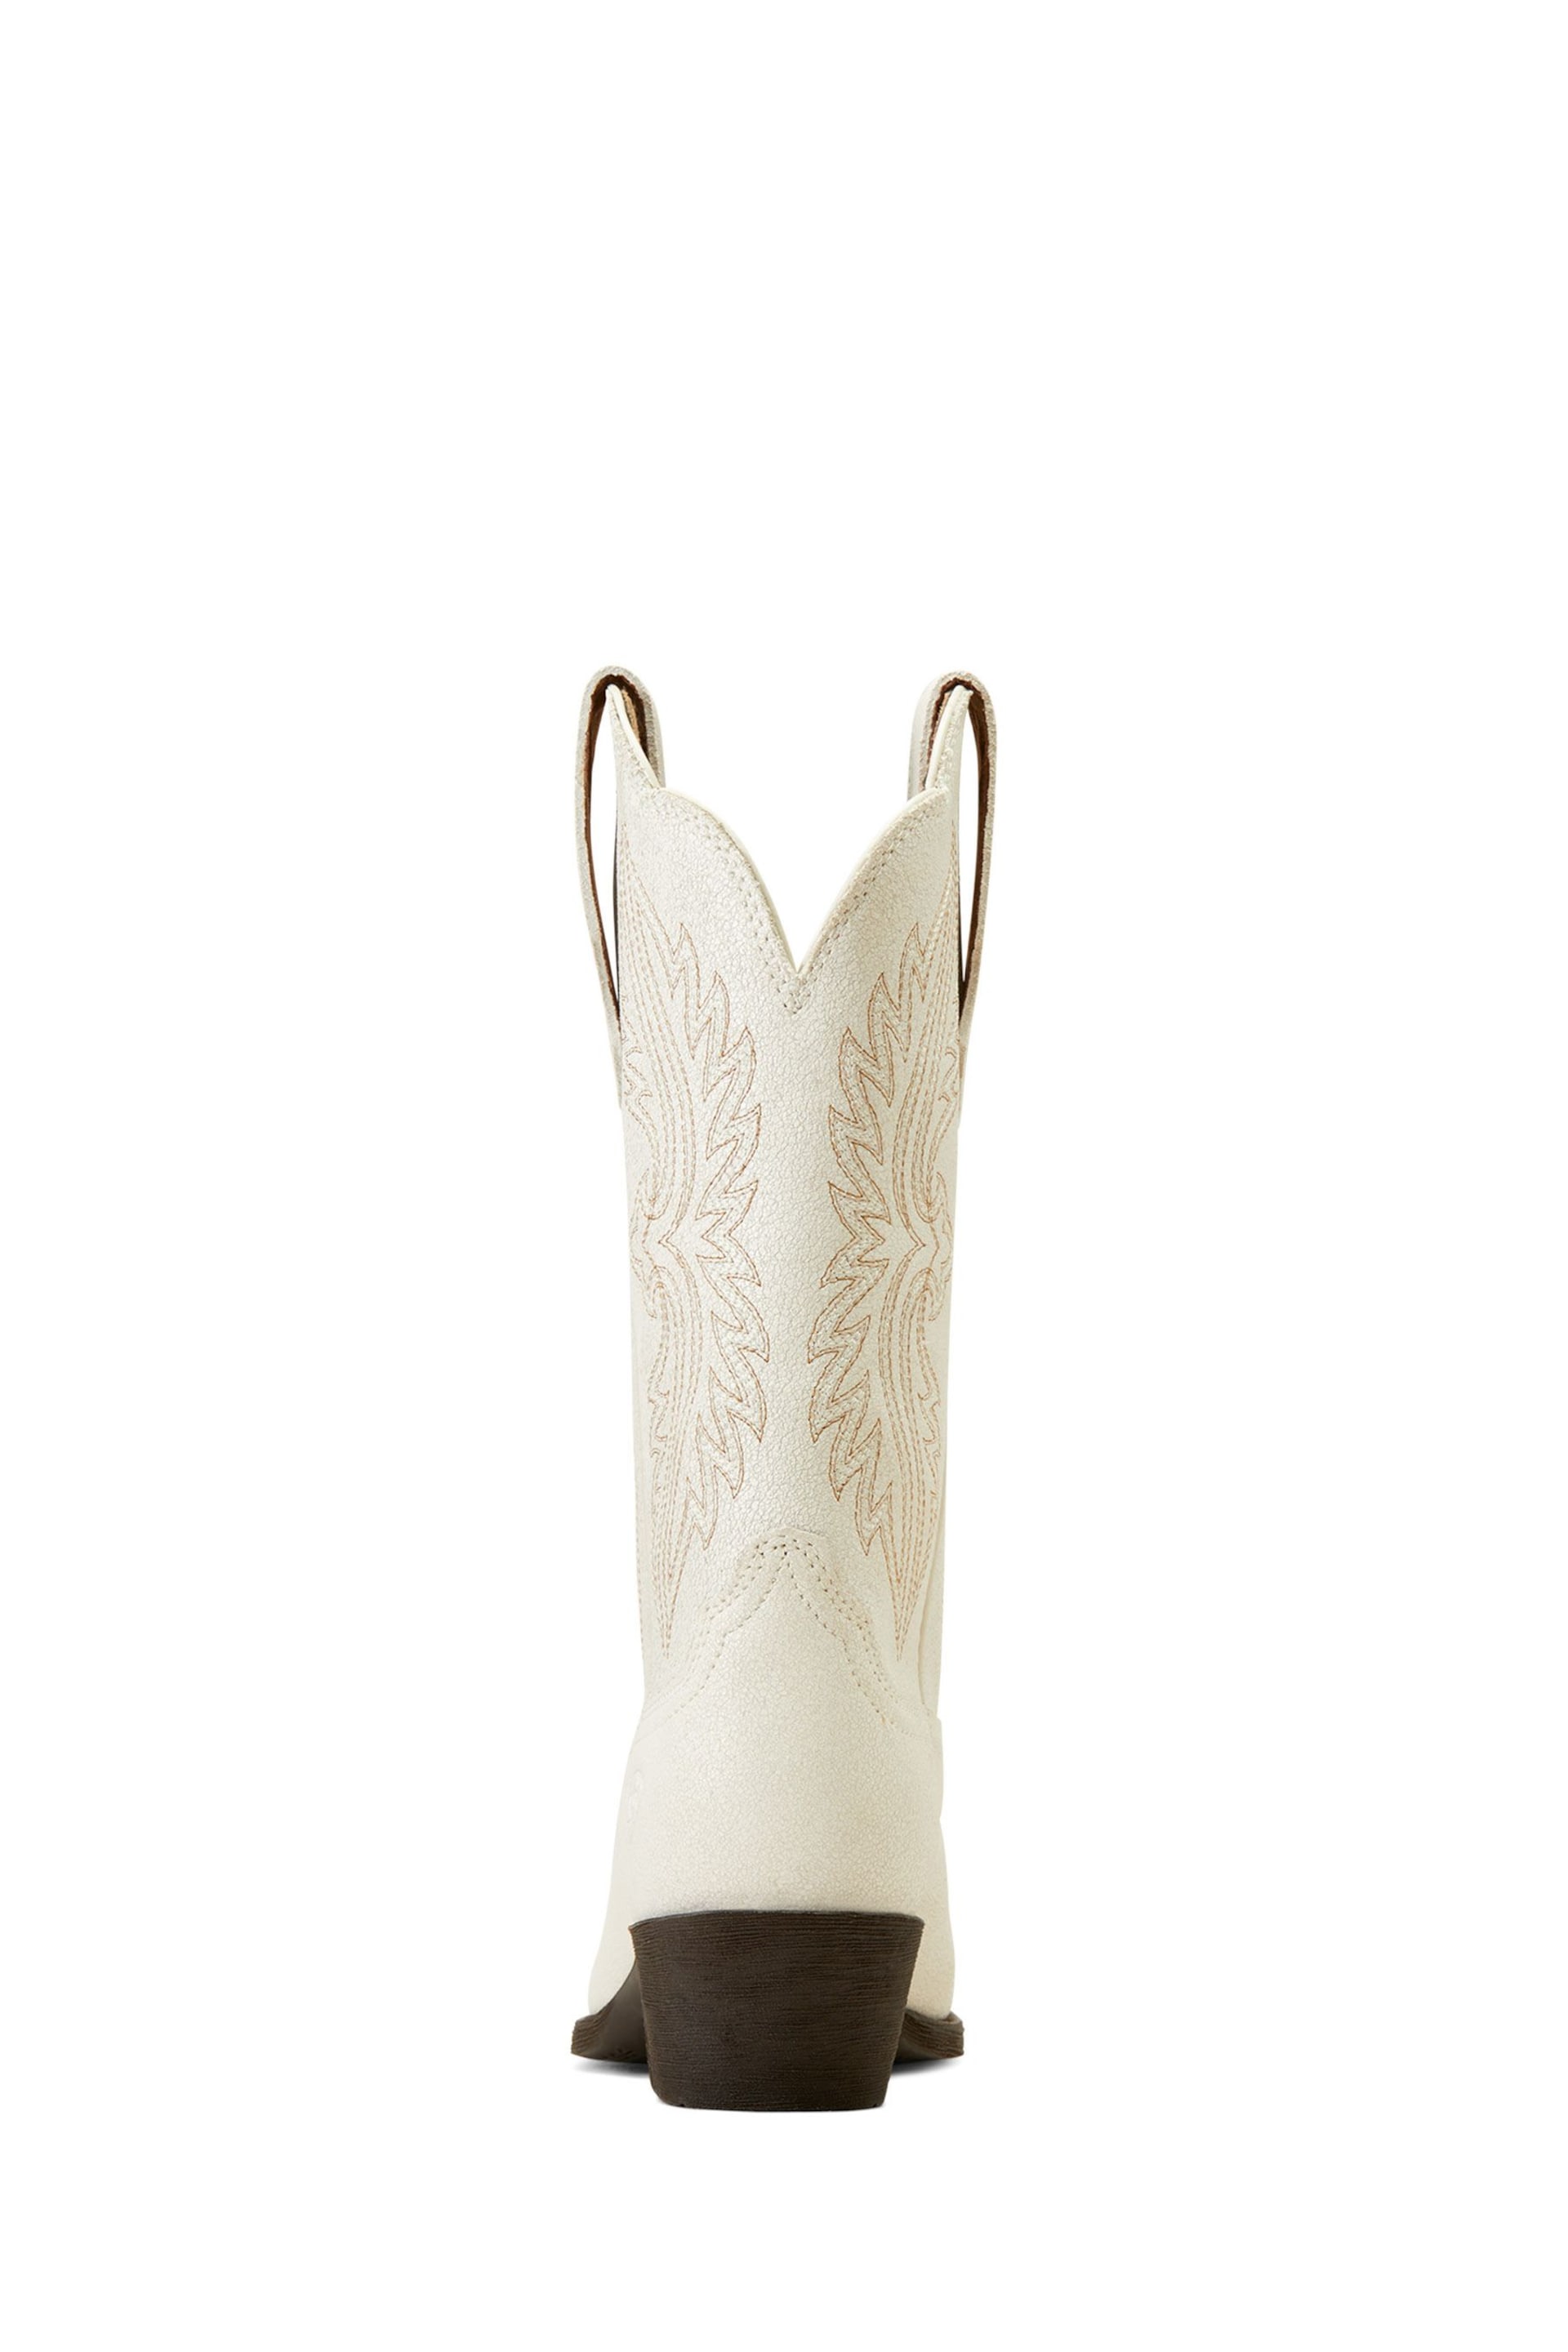 Ariat Heritage R Toe Strech Fit Boots - Image 3 of 3